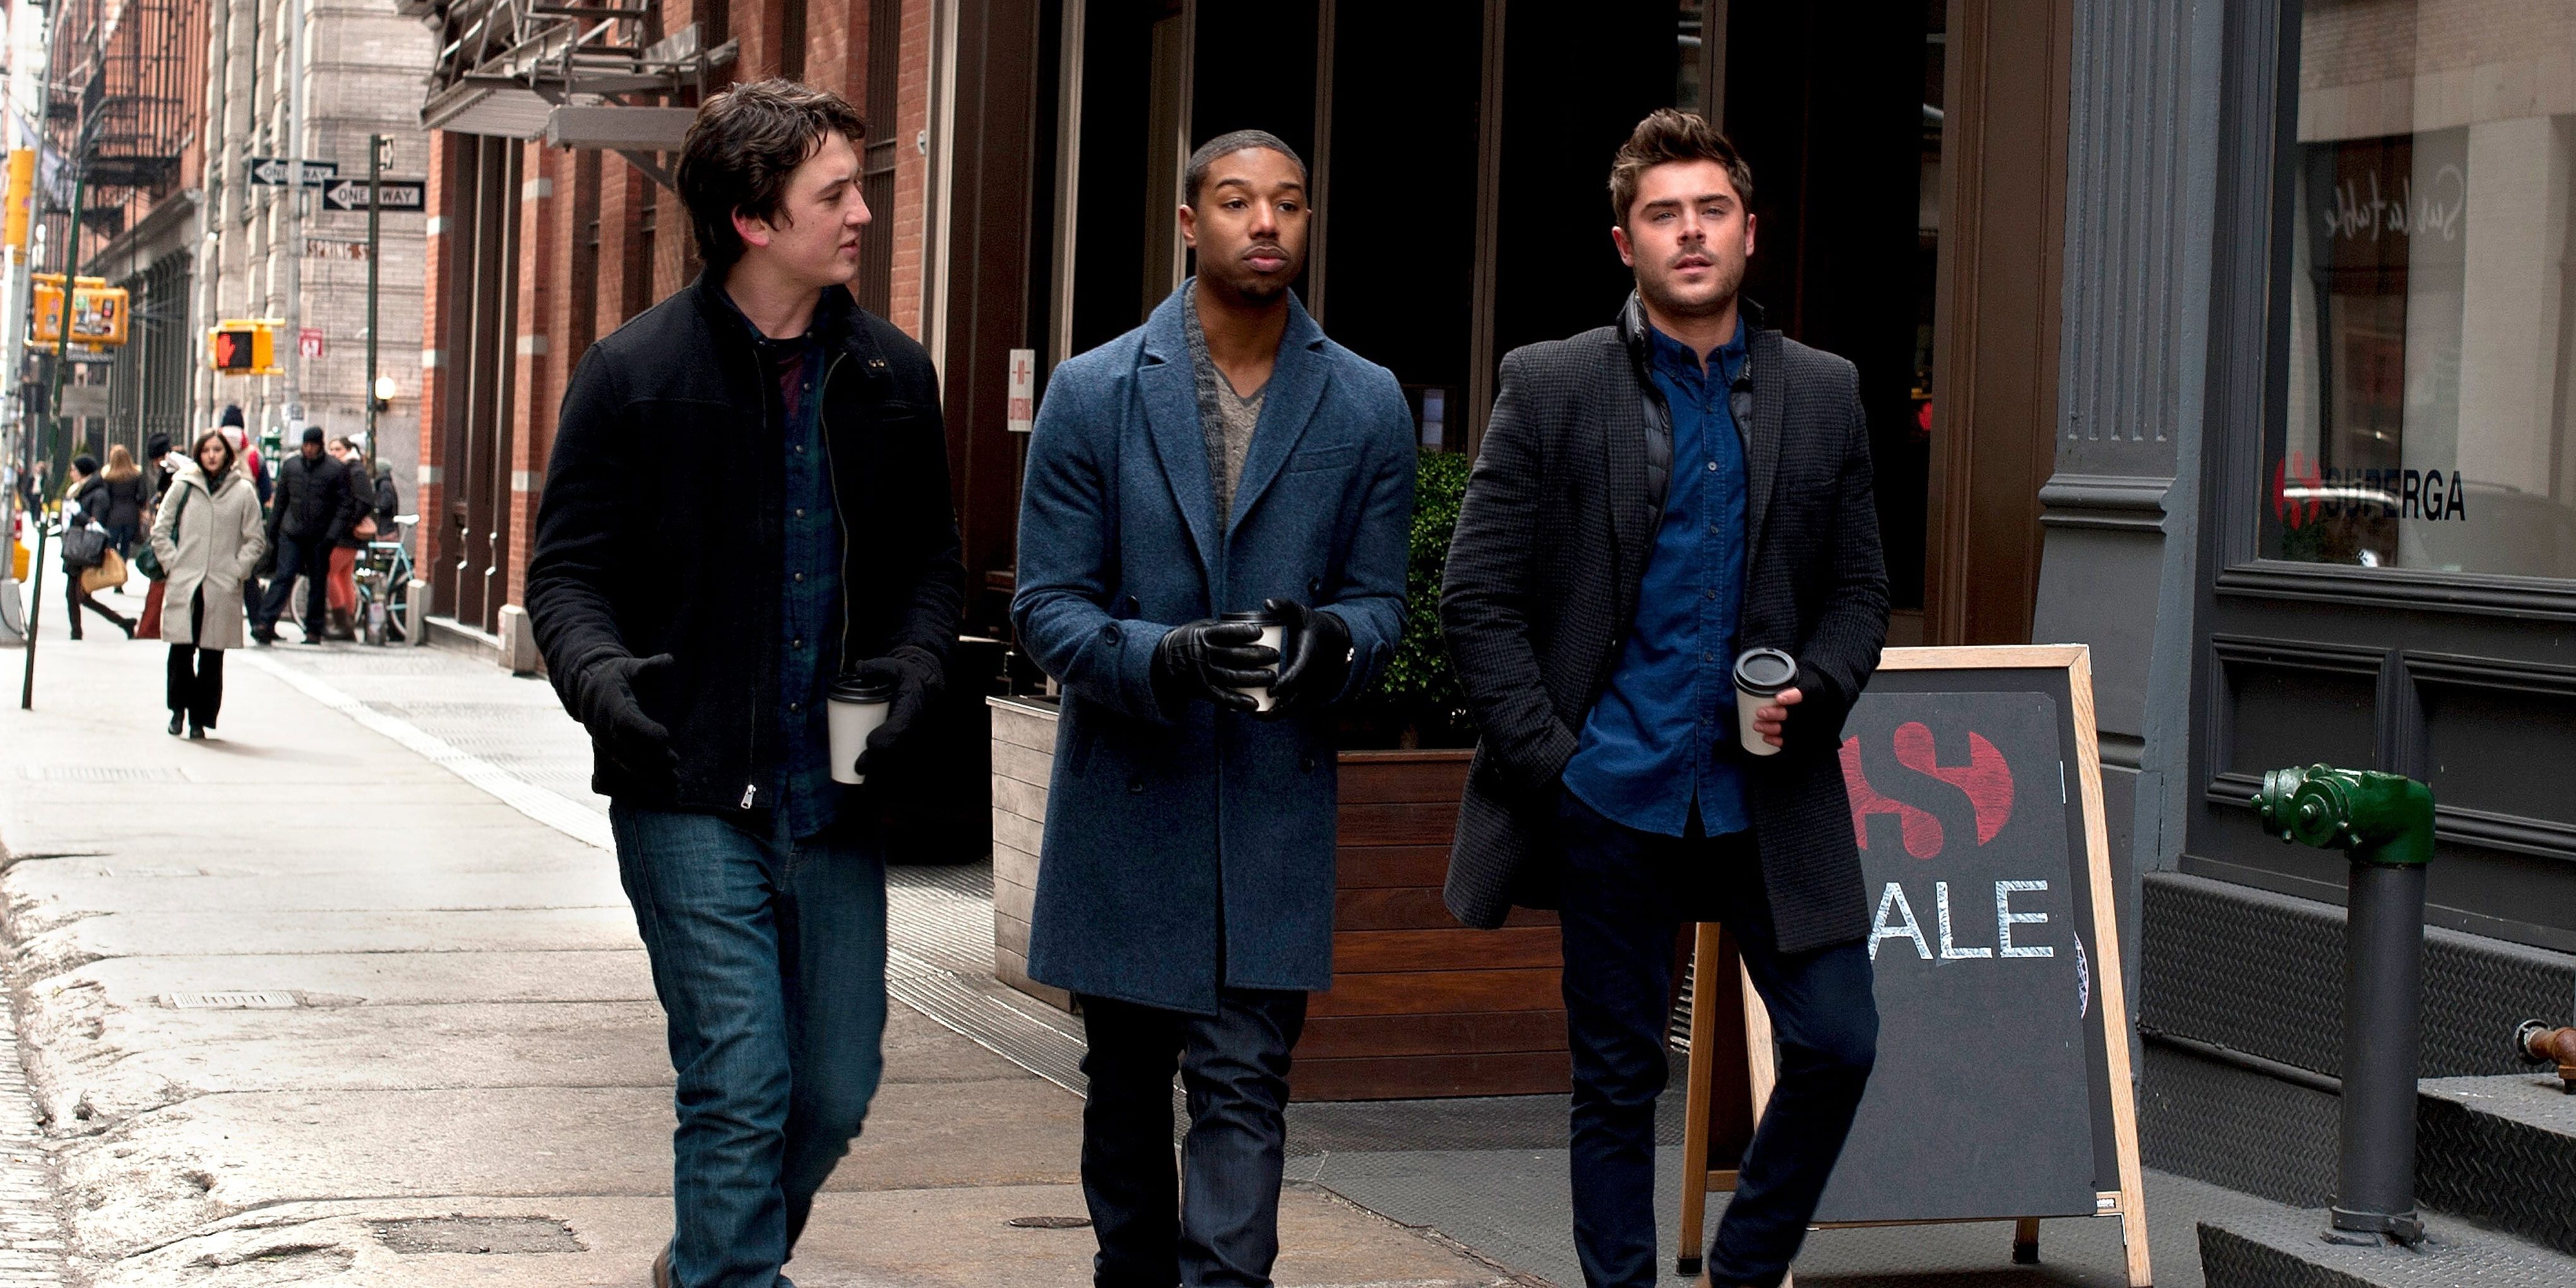 Zac Efron, Miles Teller, Michael B. Jordan in That Awkward Moment walking together with coffee hand